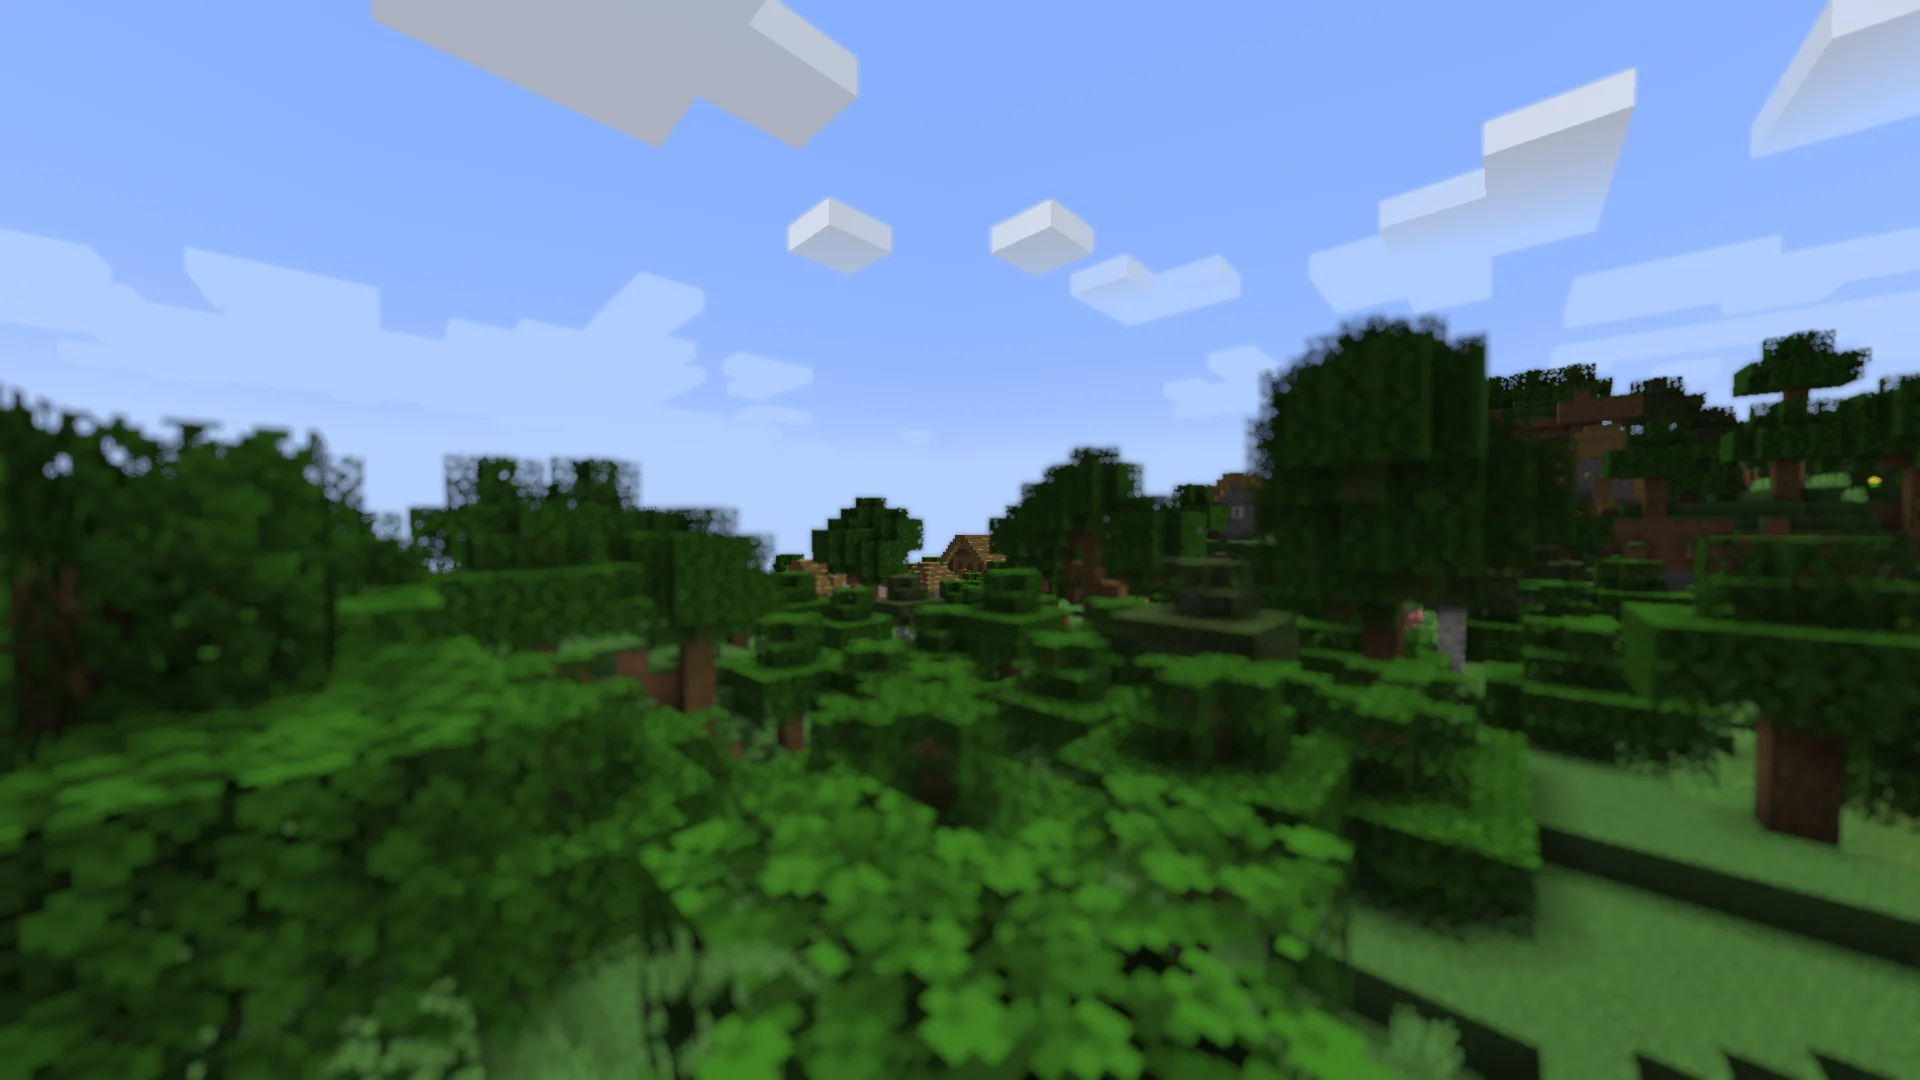 Blurry Minecraft Oak Forest with a Village clearly visible in the background